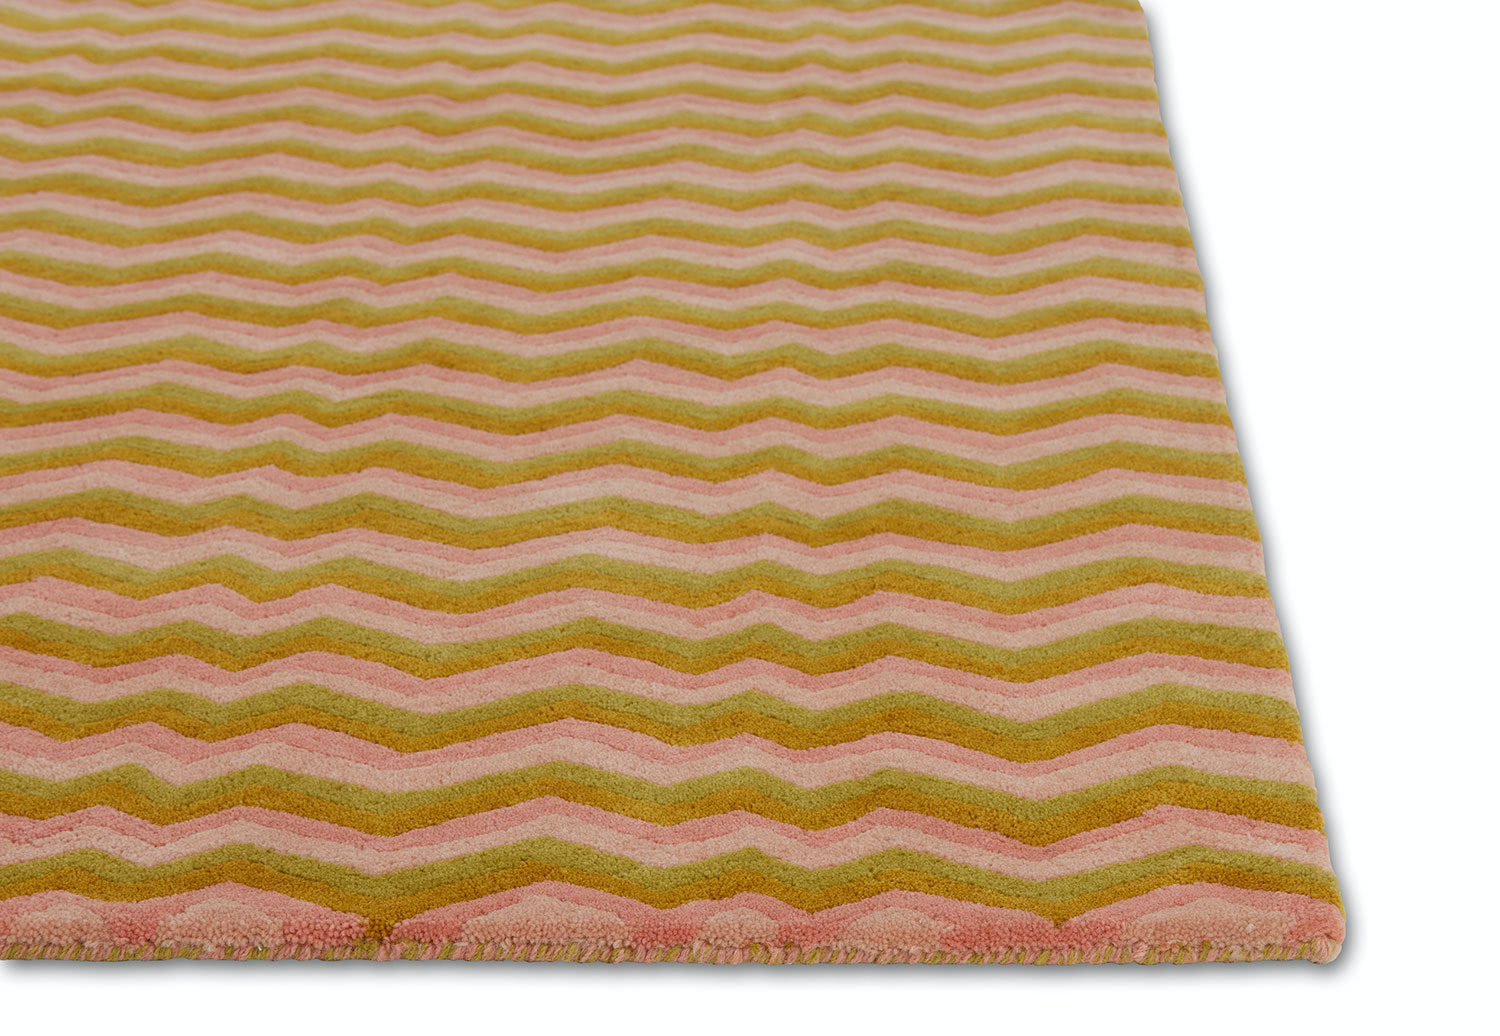 A detail of a modern area rug in pink tones called Buzz Opal